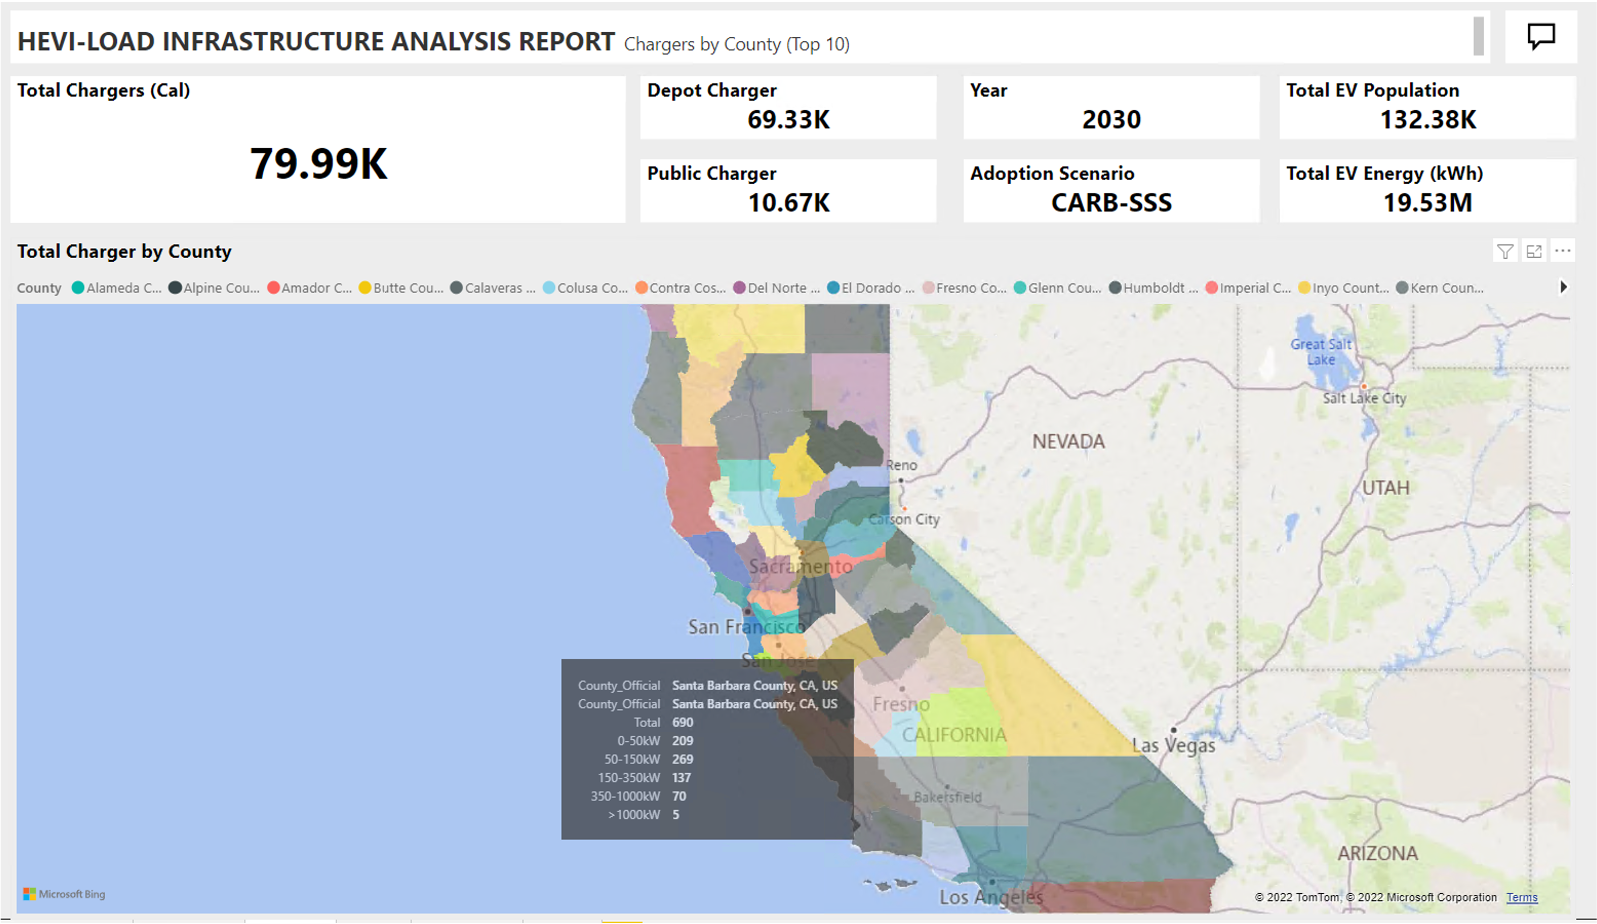 Image of a HEVI-LOAD Dashboard view presenting data on future EV vehicle market penetration, grid requirements and EV infrastructure estimates for CA.